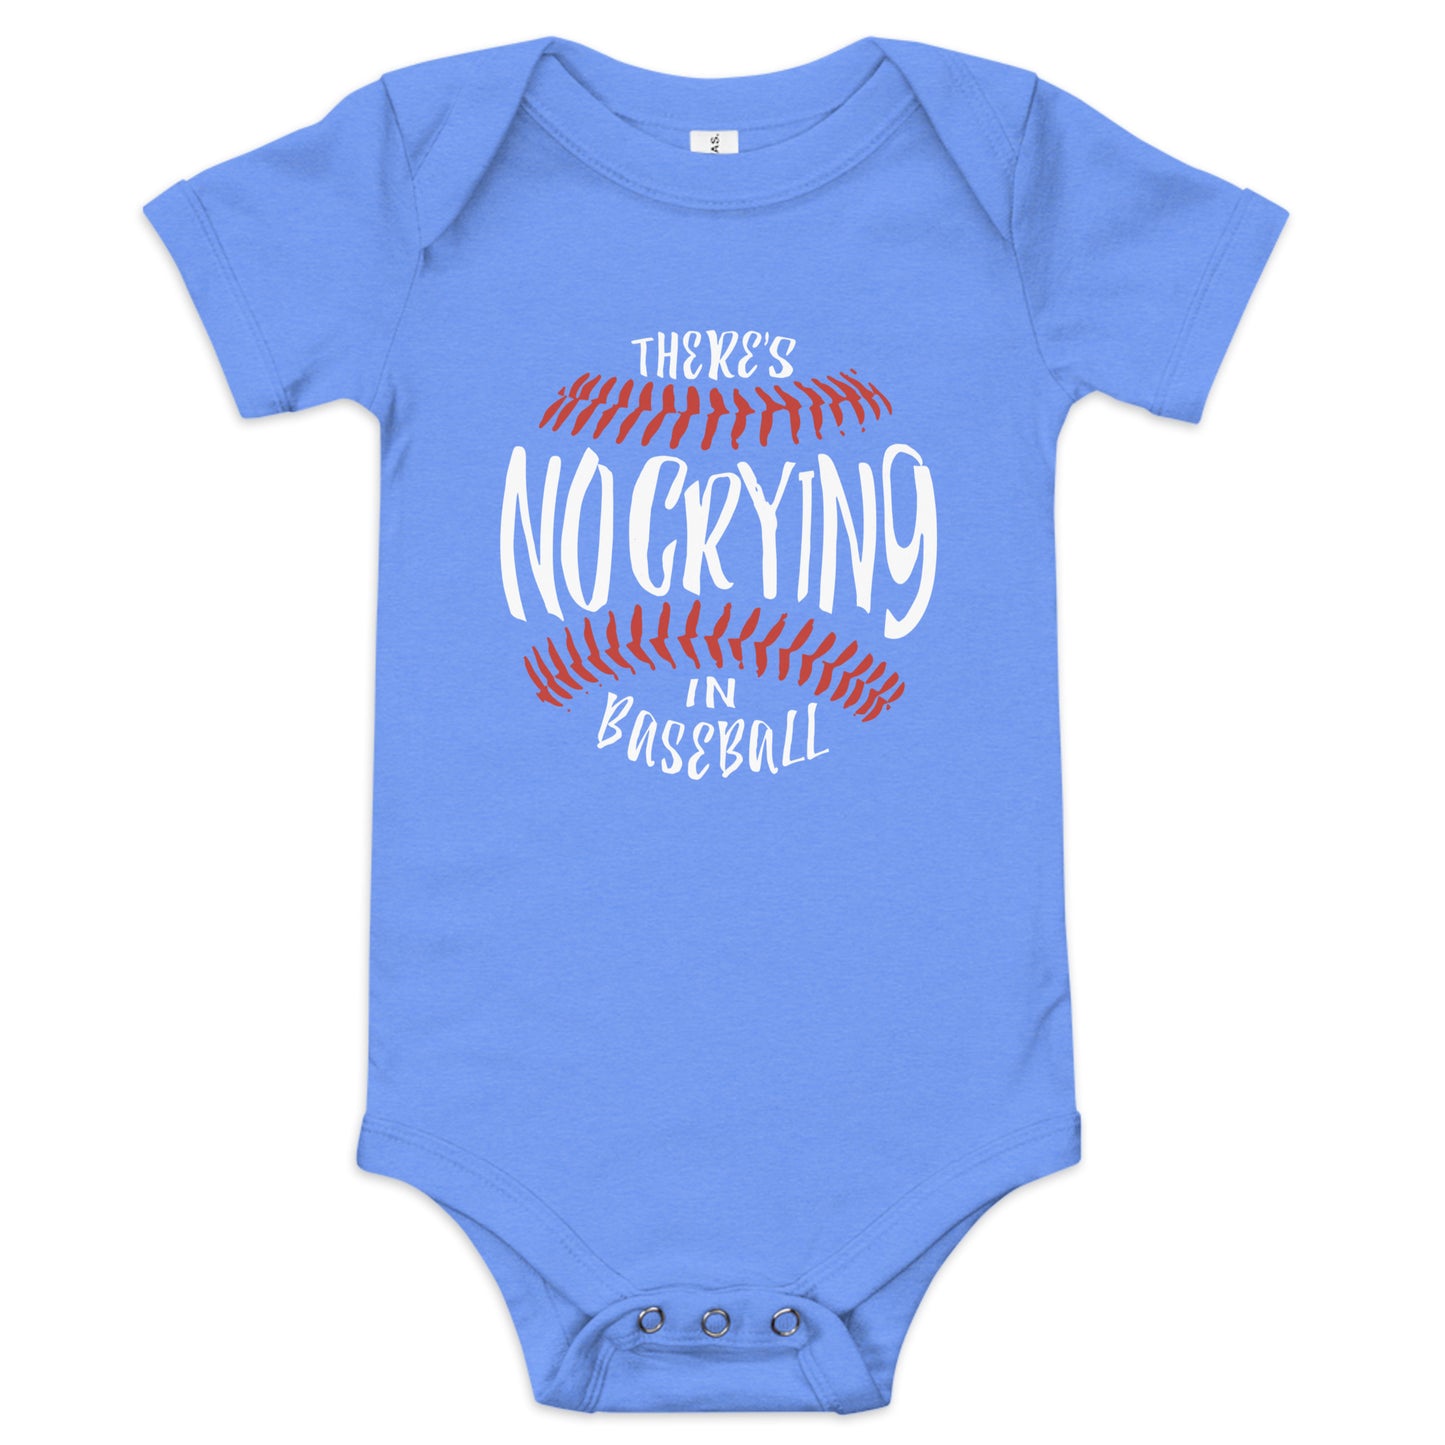 There's No Crying In Baseball Kid's Onesie